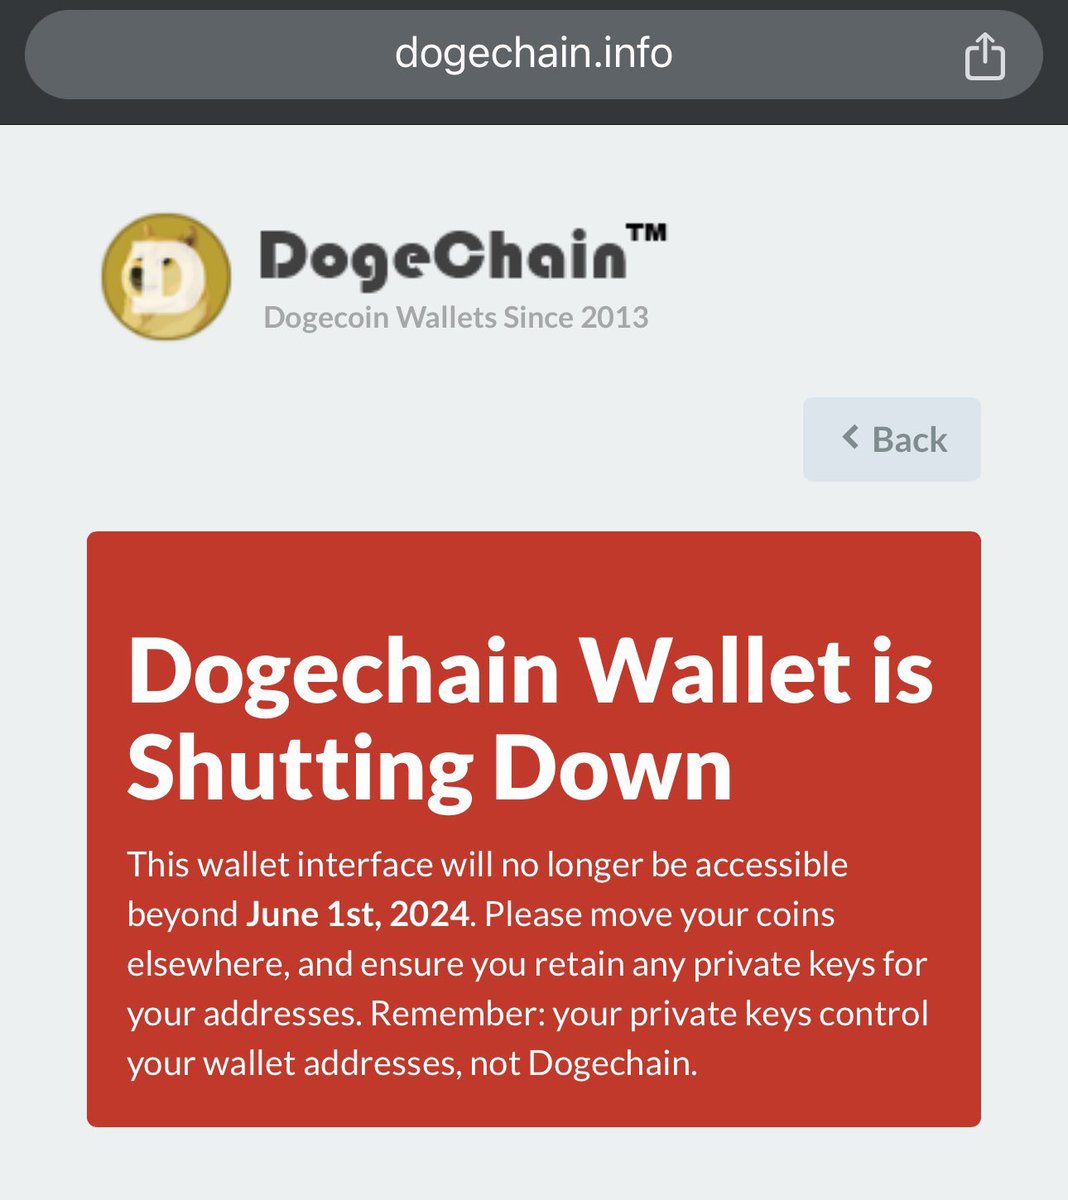 Grateful for the long-term support of Dogecoin infrastructure by Dogechain Wallet. Following in Dogechain's footsteps, Unielon is committed to further enhancing Dogecoin's infrastructure. #Dogecoin #Unielon #Doge #Cardinals